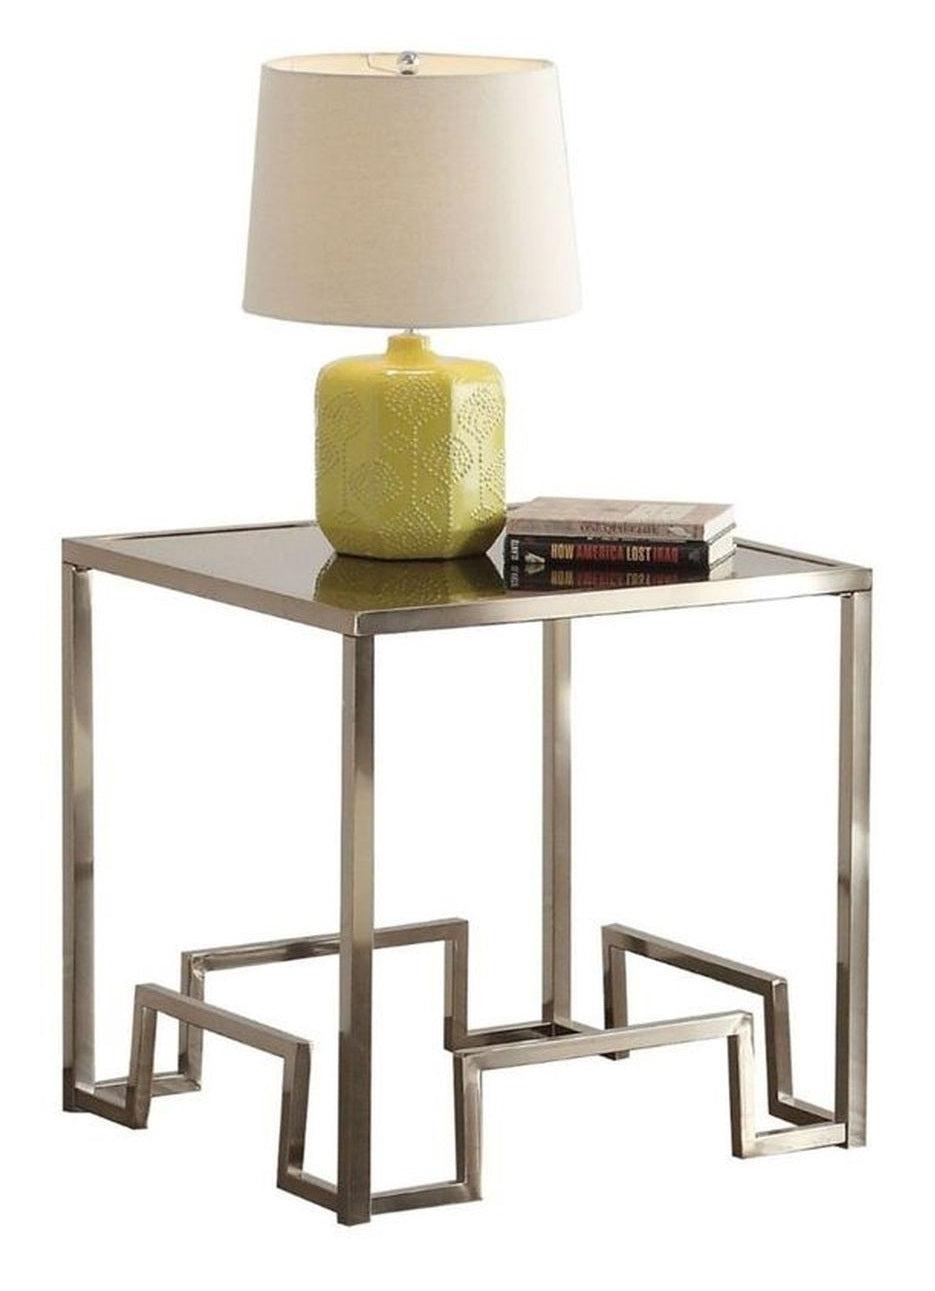 Acme Damien End Table in Champagne 81627  Half Price Furniture